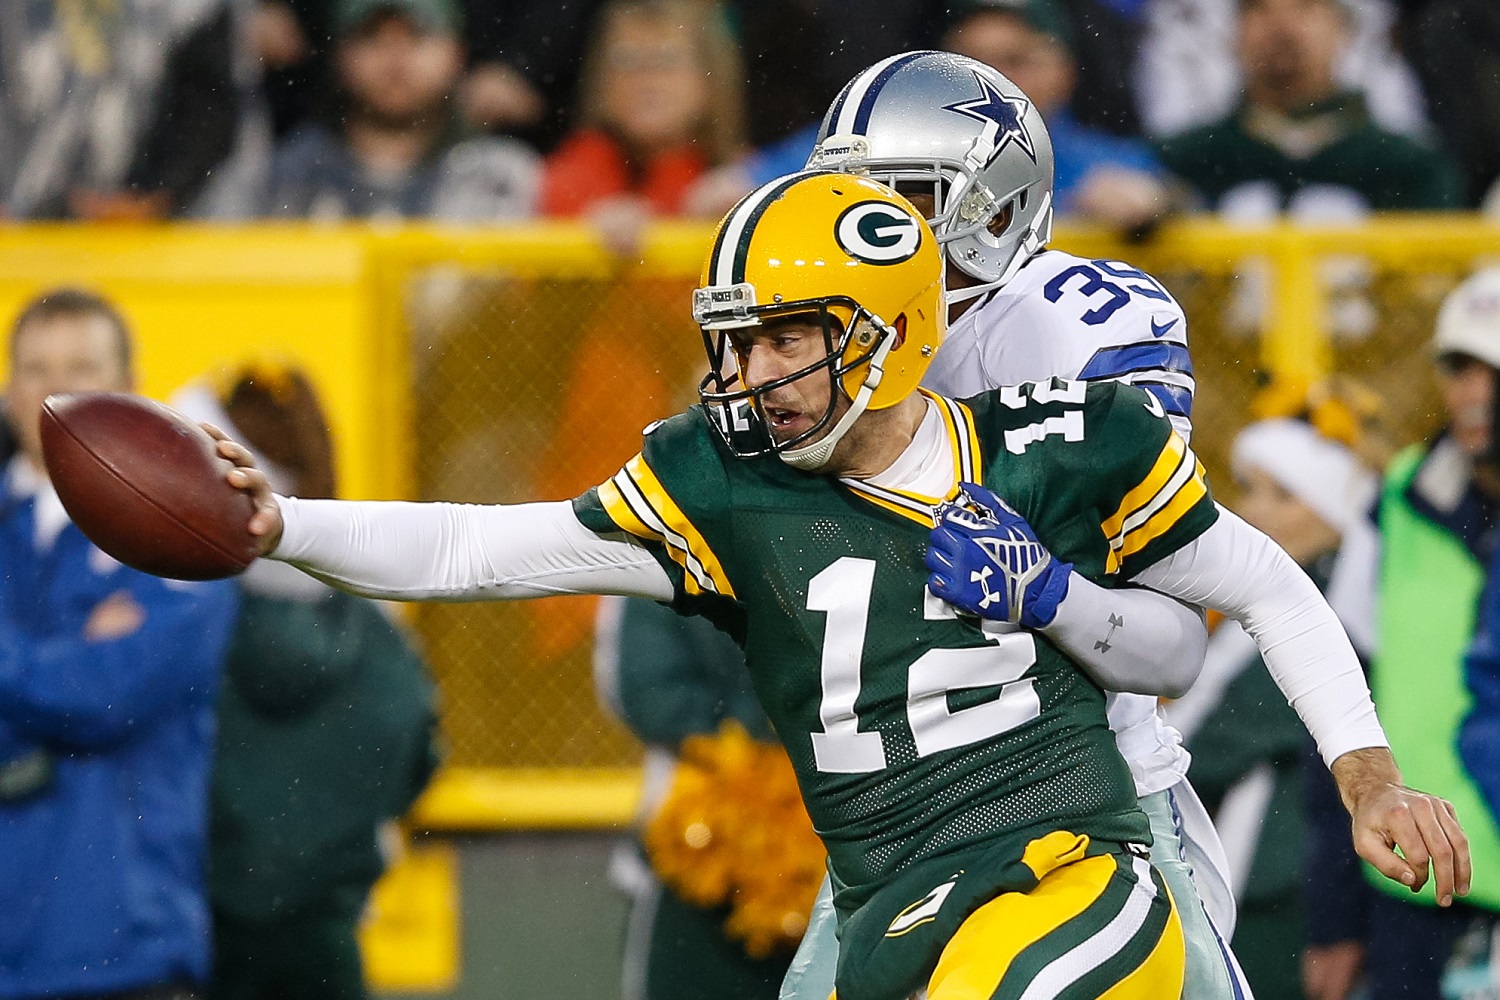 GREEN BAY, WI - DECEMBER 13:  Quarterback  Aaron Rodgers #12 of the Green Bay Packers is tackled by  Brandon Carr #39 of the Dallas Cowboys in the first half at Lambeau Field on December 13, 2015 in Green Bay, Wisconsin. The Green Bay Packers defeated the Dallas Cowboys 28 to 7.  (Photo by Joe Robbins/Getty Images)